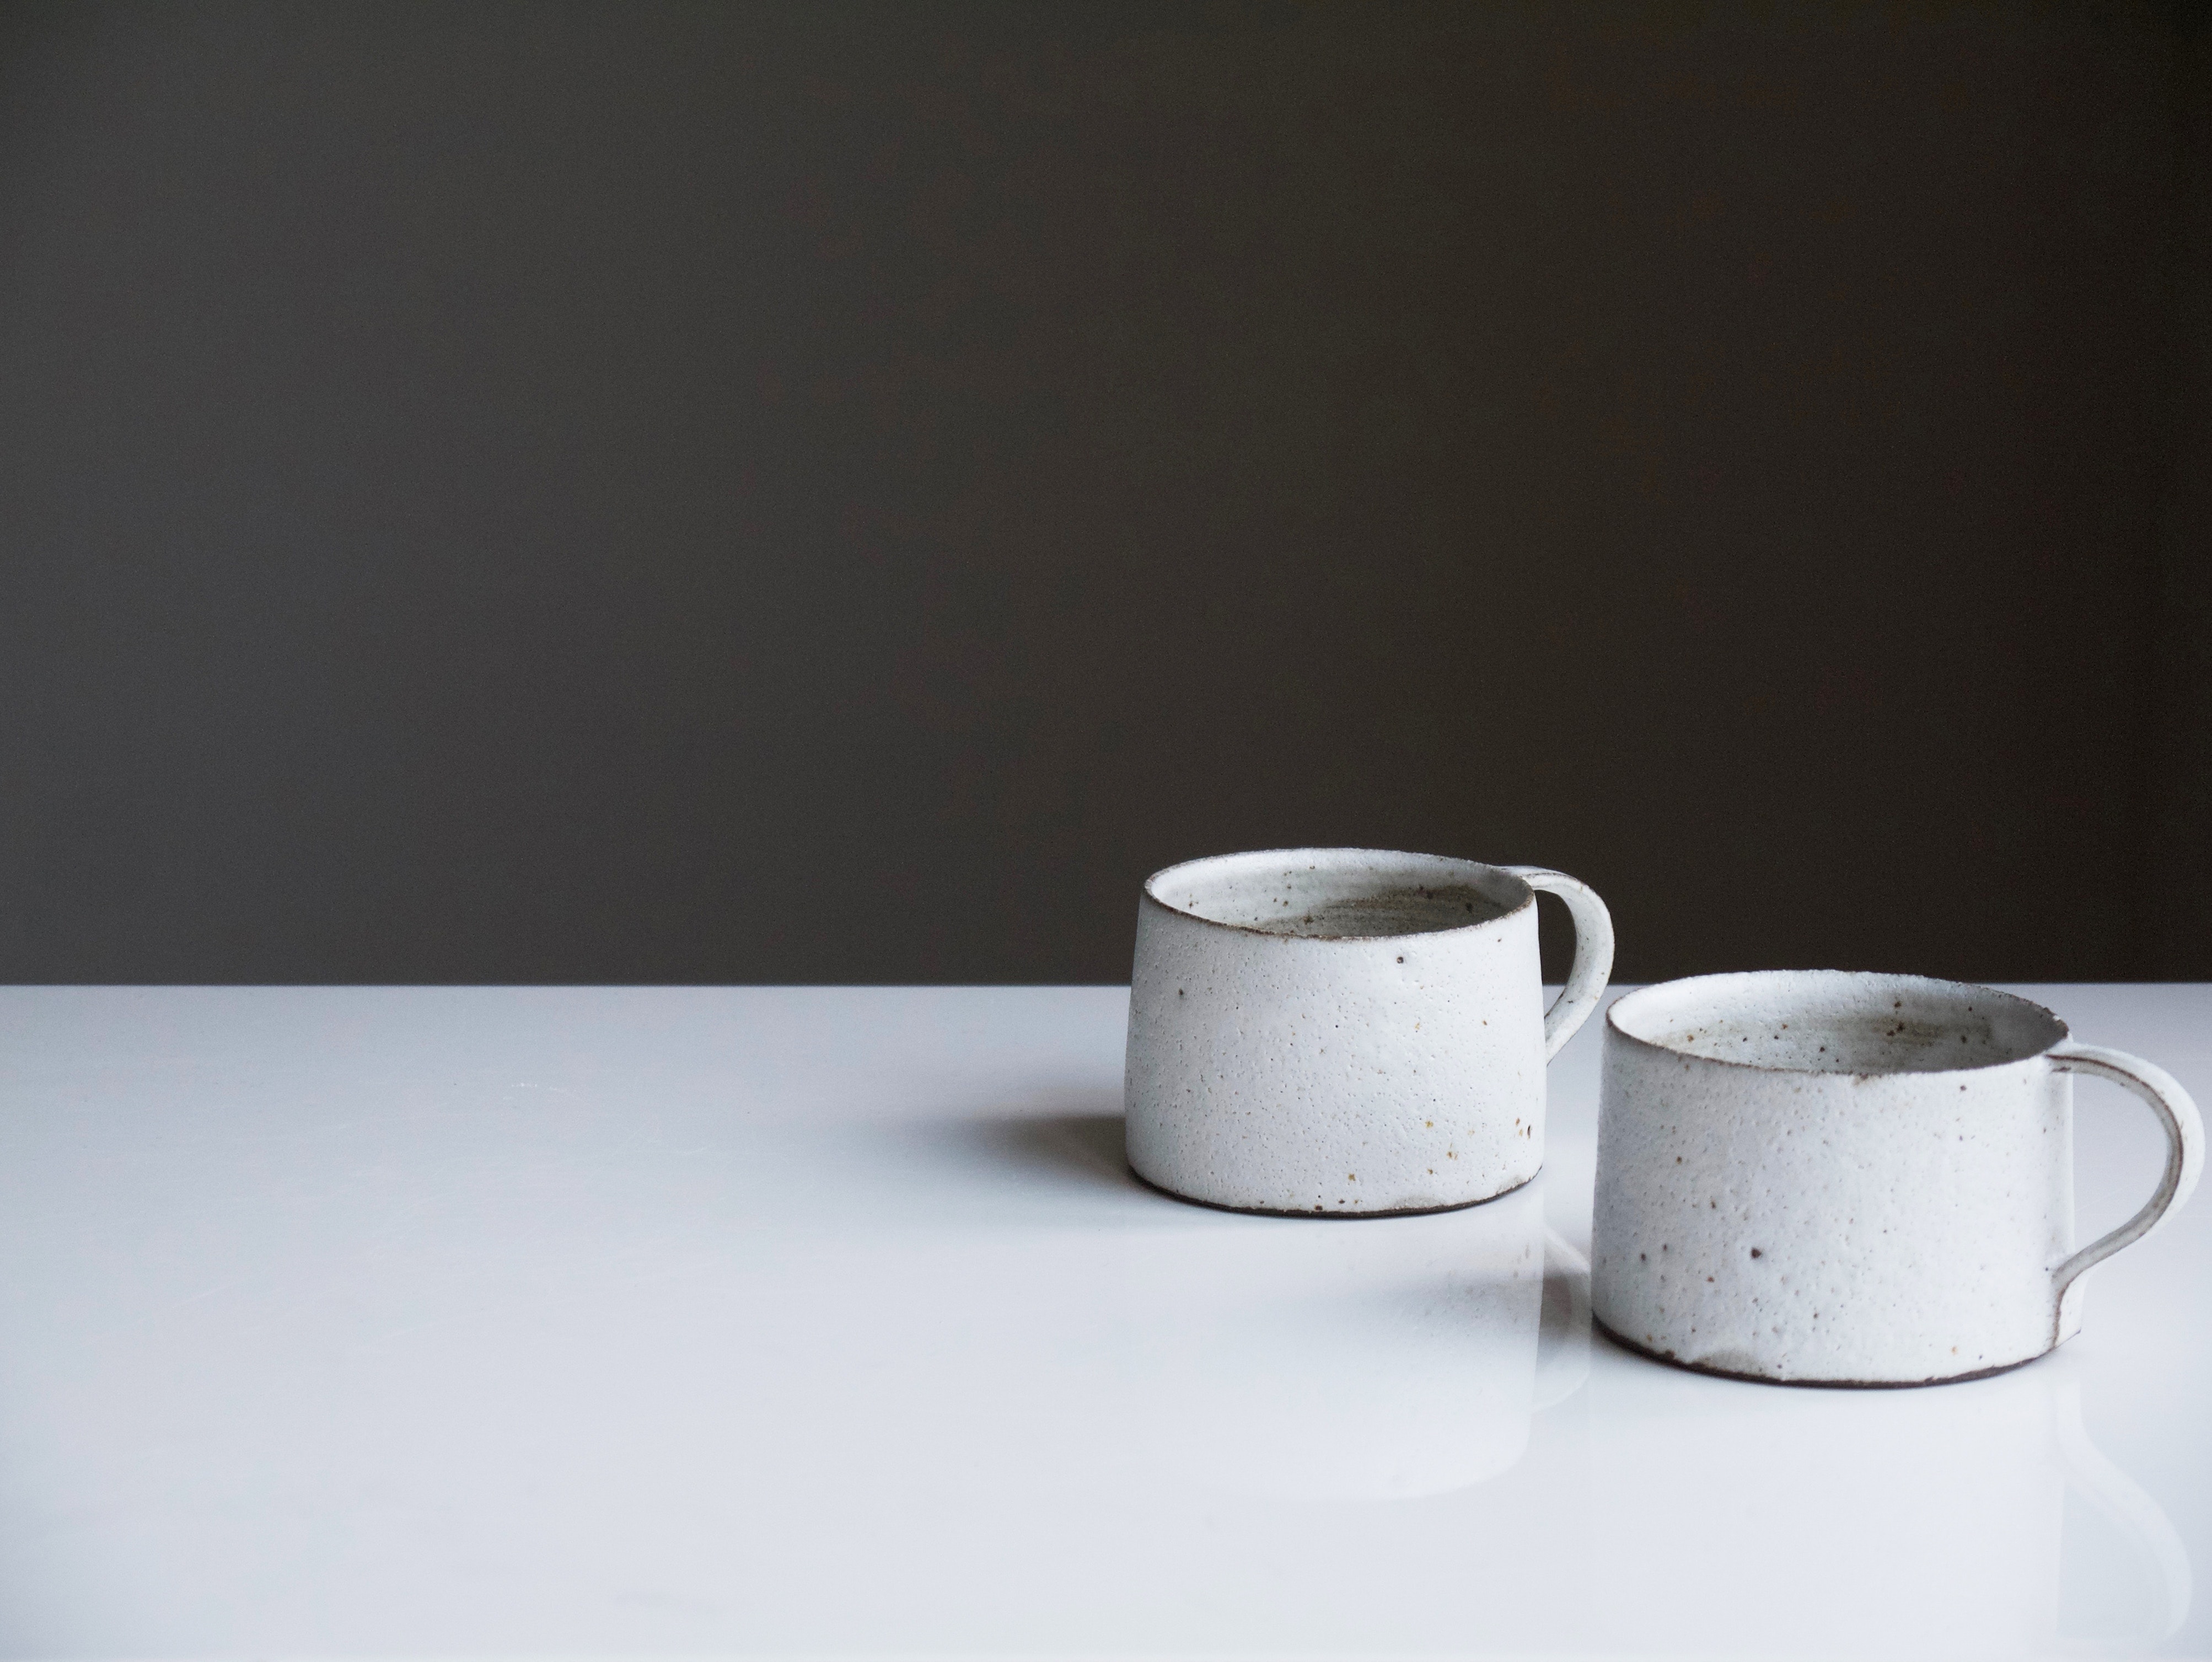 Two ceramic mugs sit on a white table